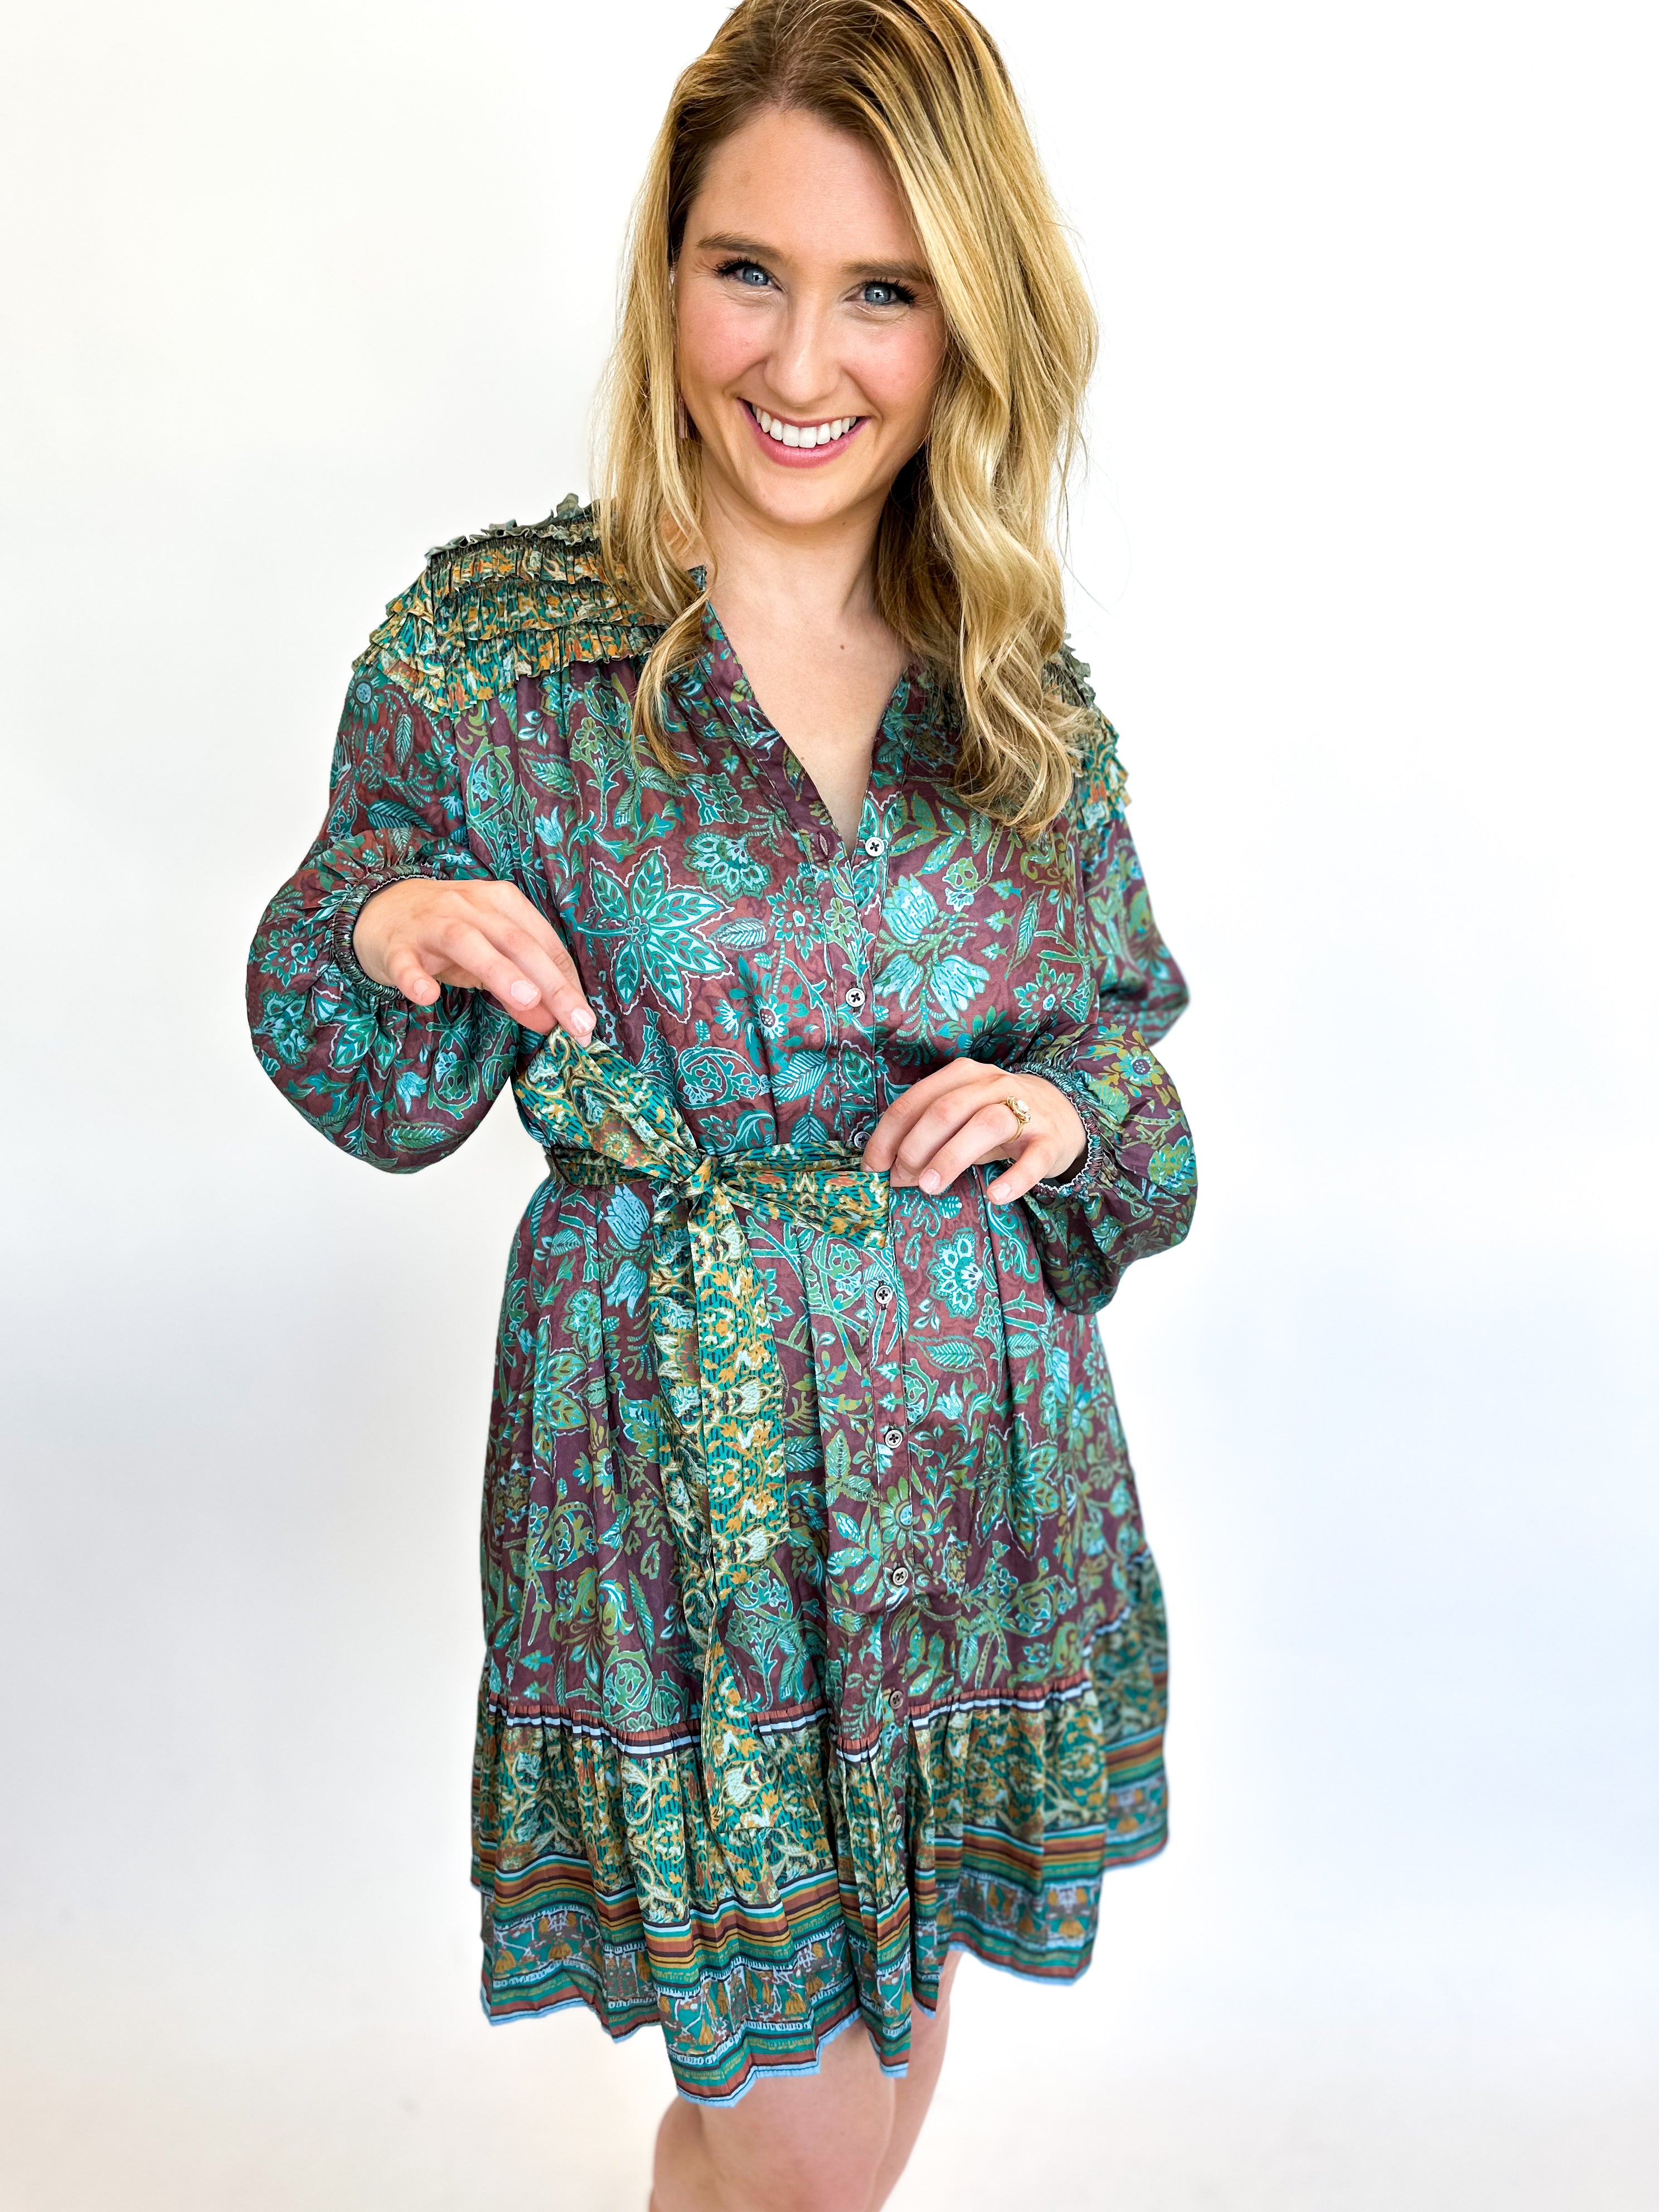 Teal & Mocha Floral Mini Dress-510 Mini-CURRENT AIR CLOTHING-July & June Women's Fashion Boutique Located in San Antonio, Texas